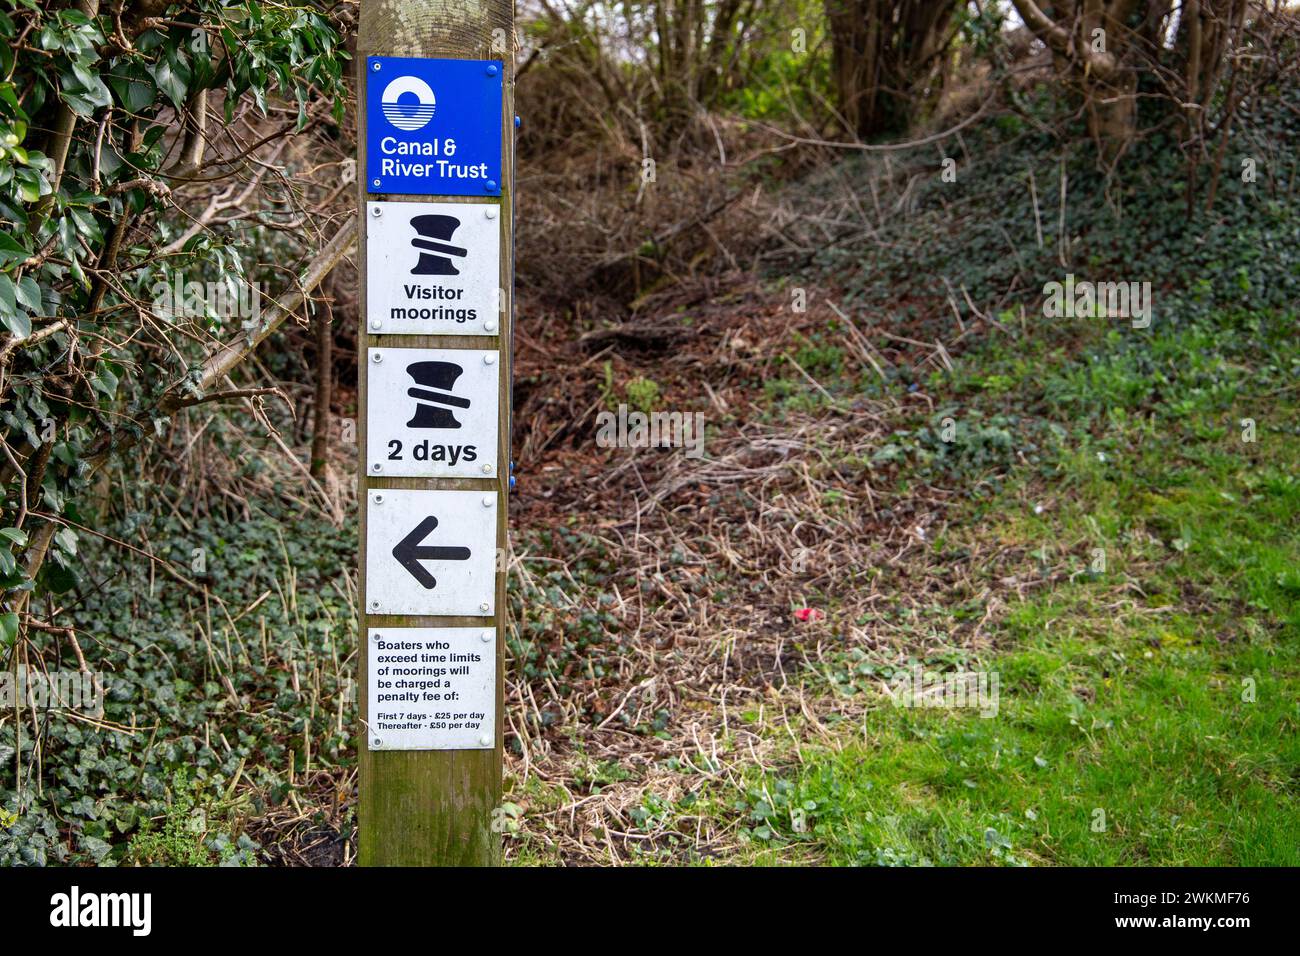 Visitor moorings signpost by the Canal & River Trust indicating a 2-day limit, set against natural foliage. Stock Photo